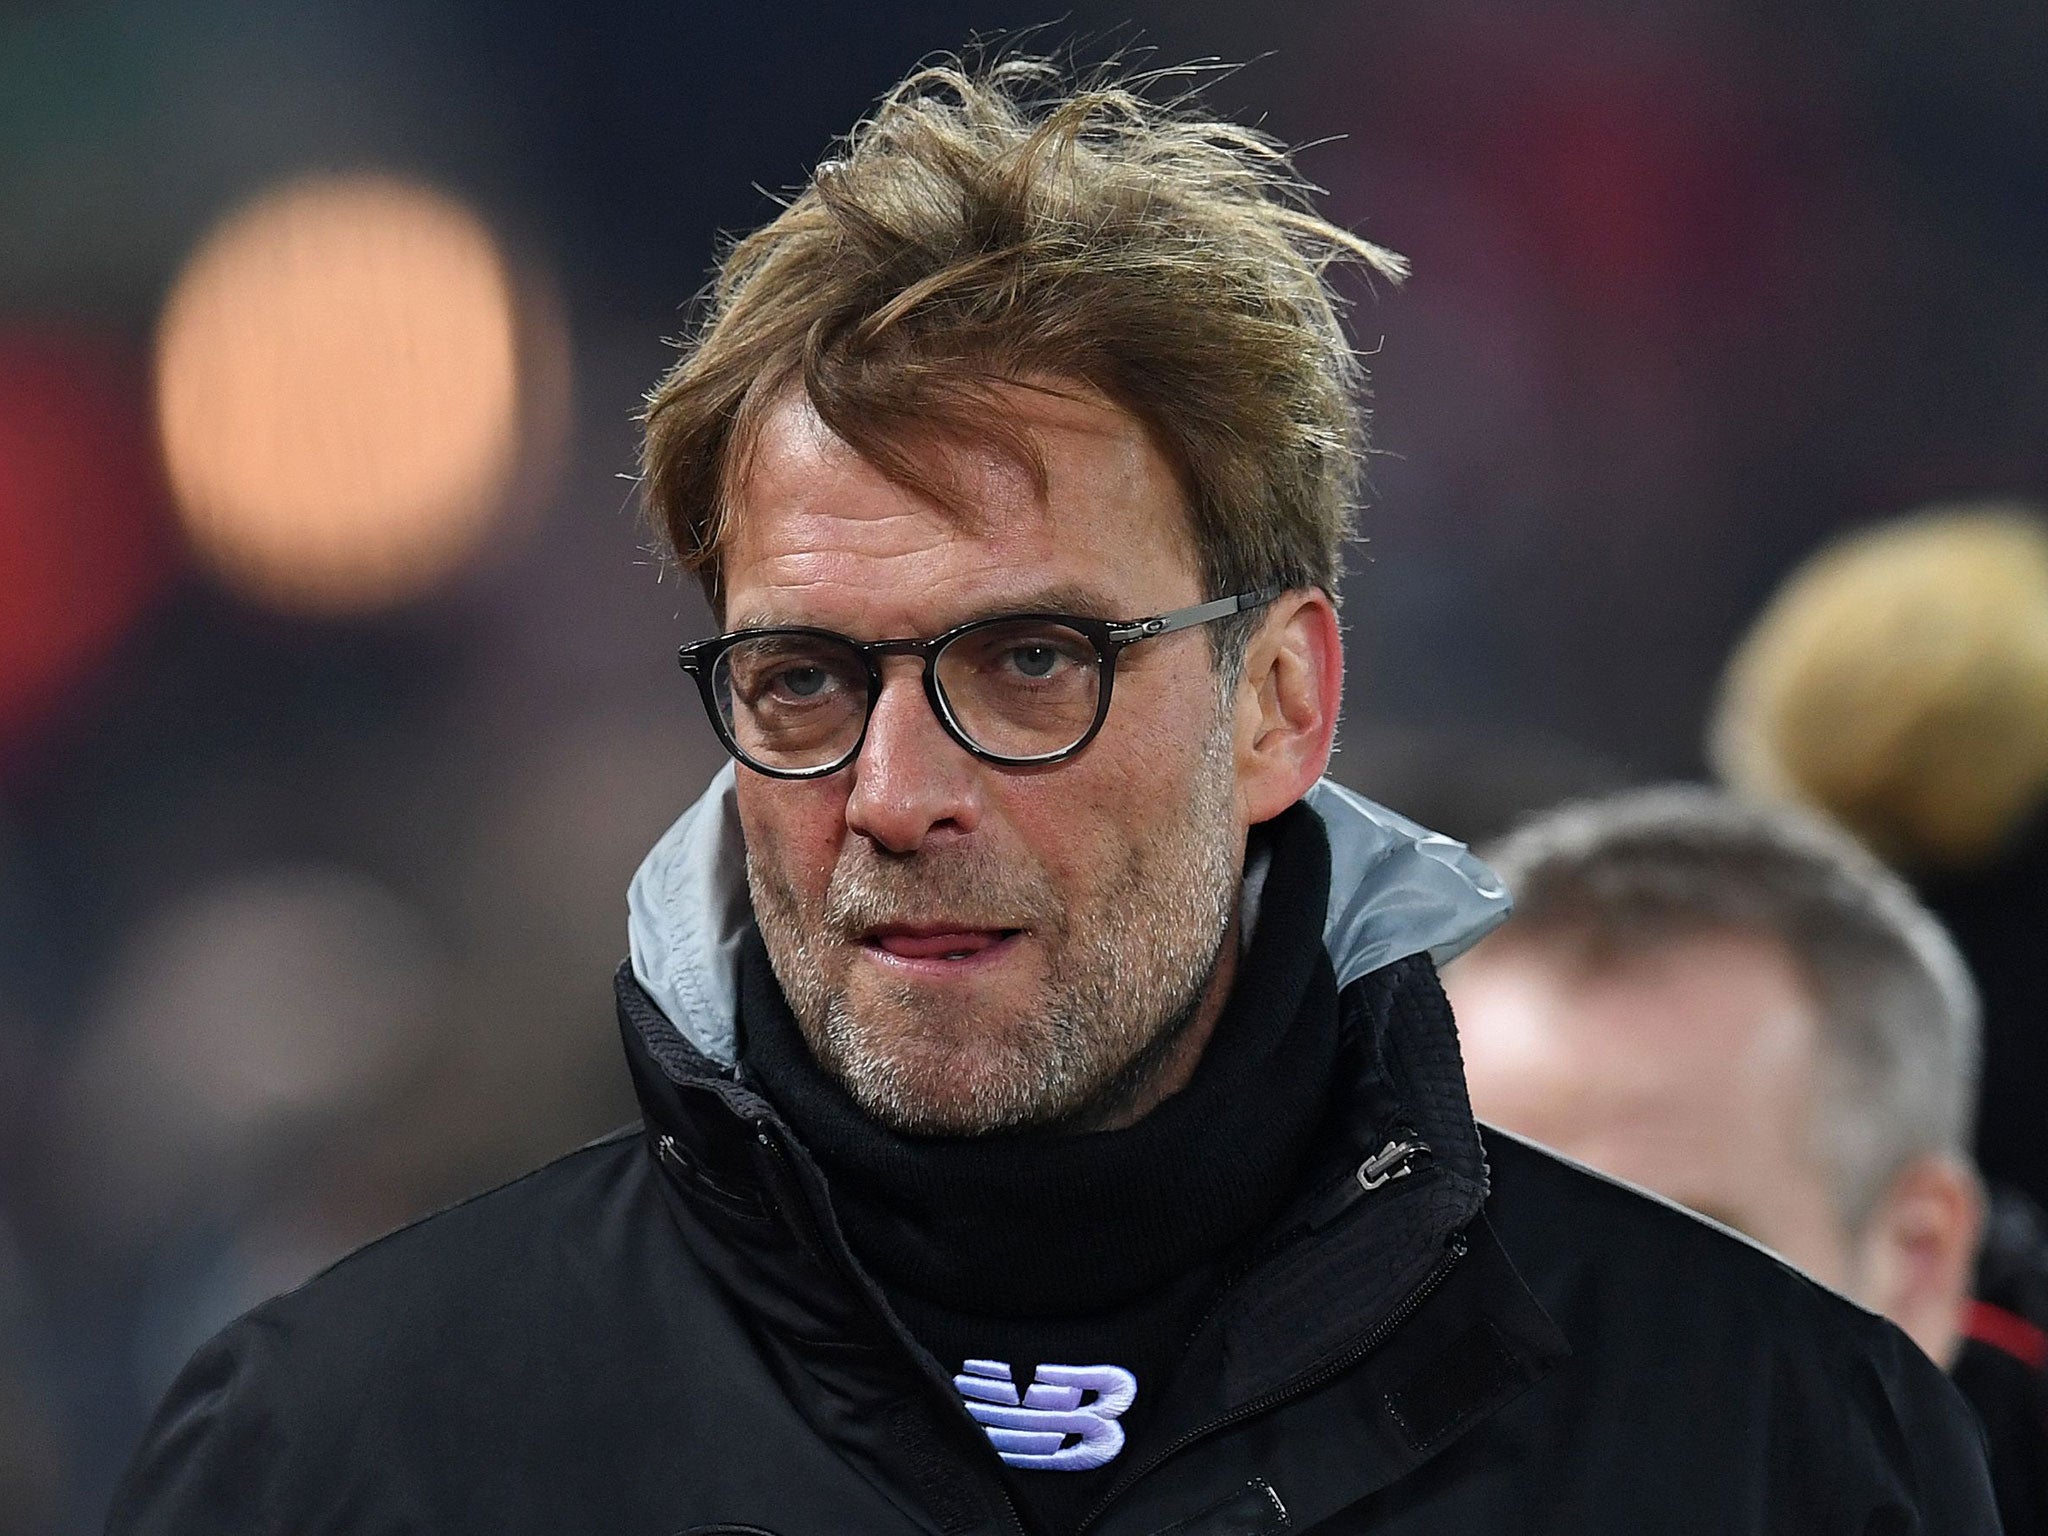 Klopp knows Tuesday's game could spell the end of Liverpool's title hopes should they lose